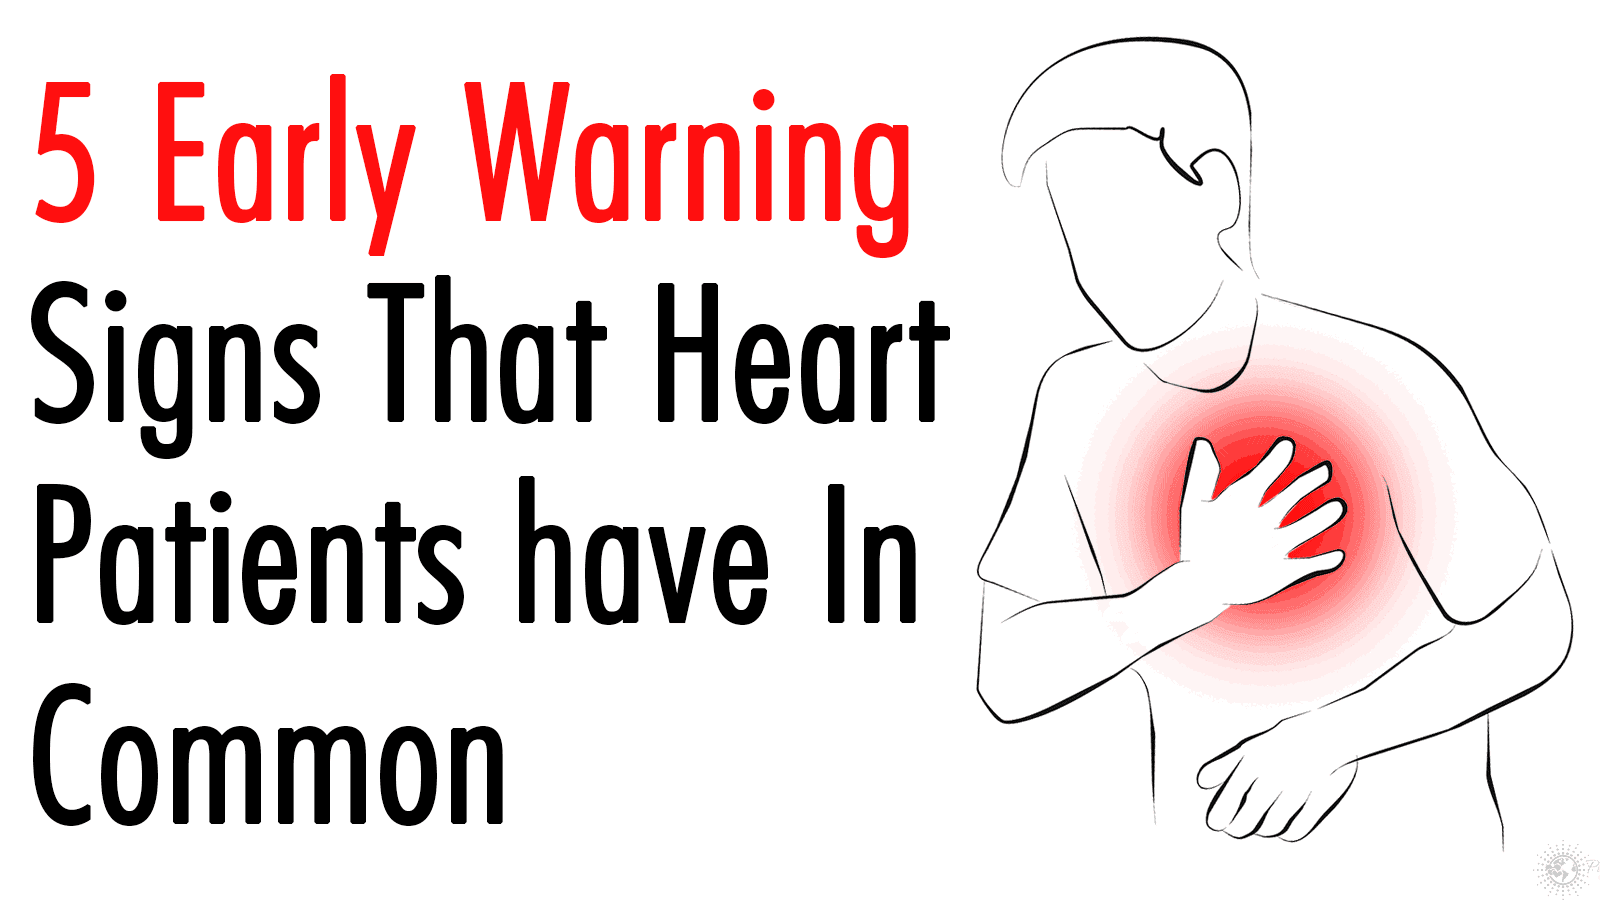 Researchers Reveal 5 Early Warning Signs That Heart Patients Have In Common